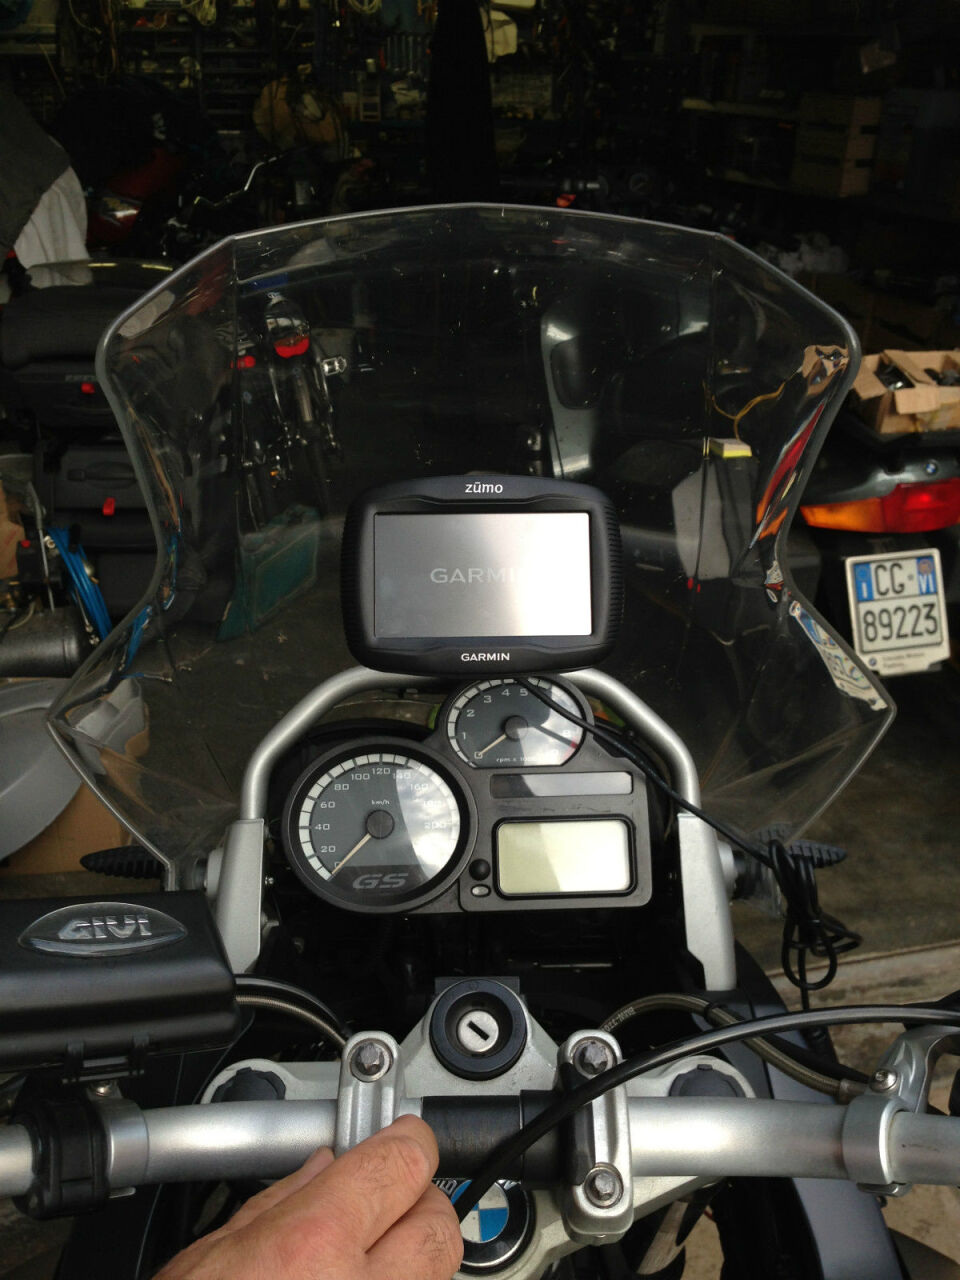 BMW R 1200 GS GPS/Smart phone holder/support 2004-2007